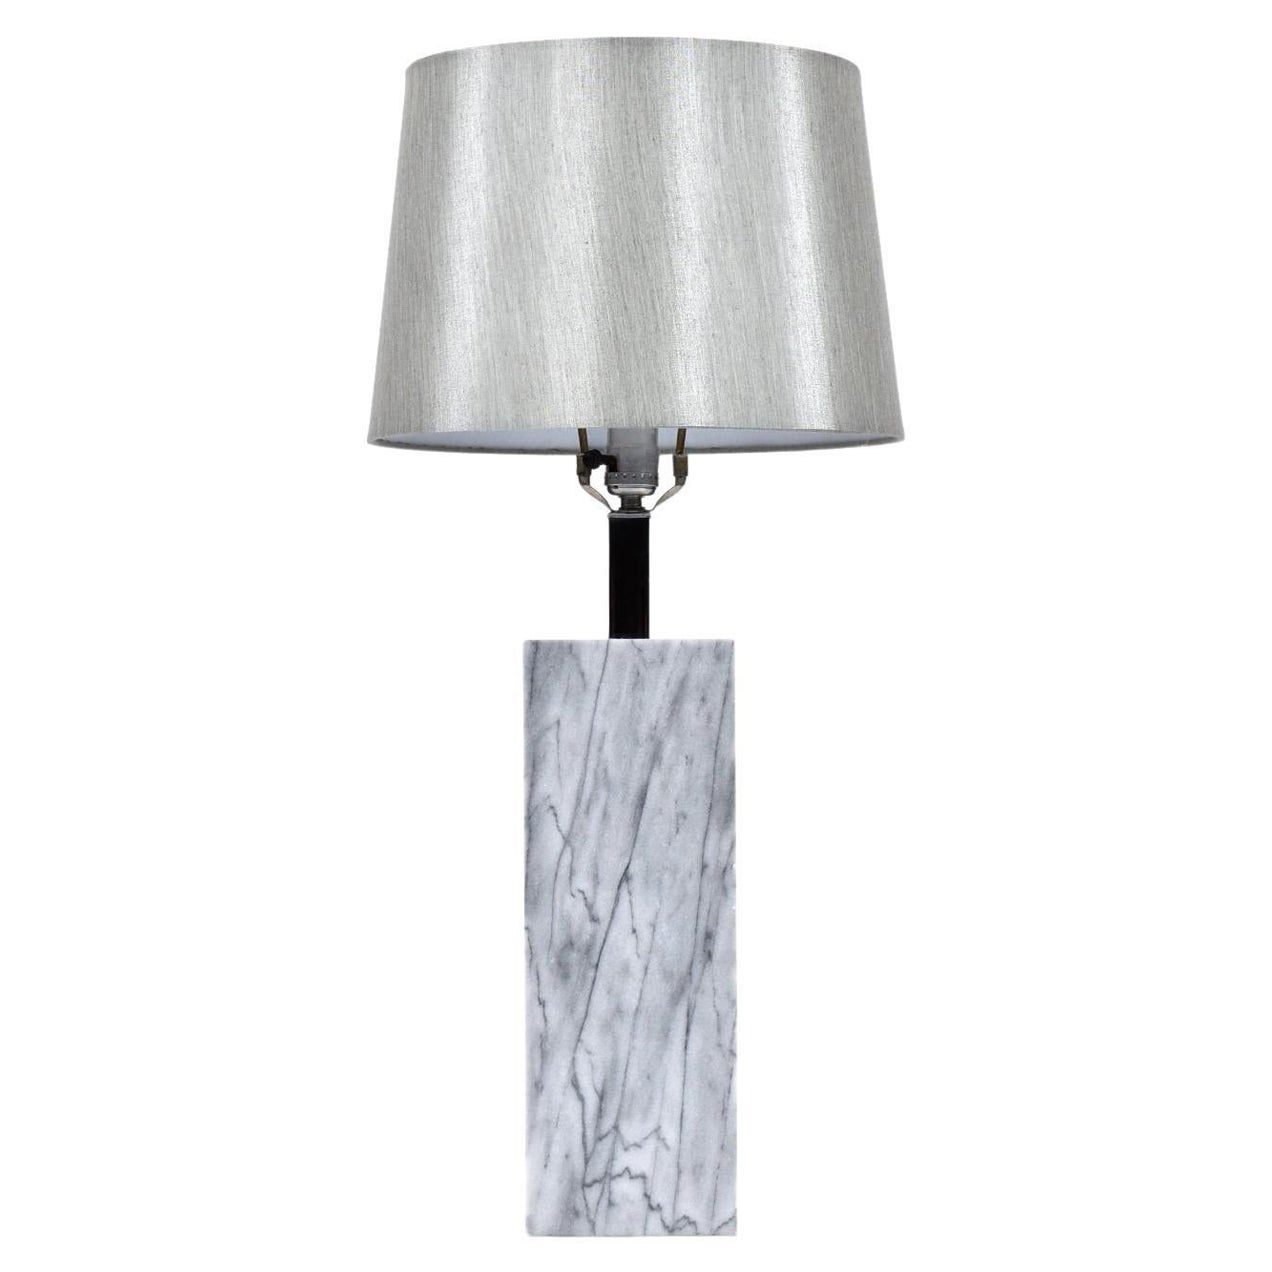 Nessen Style Gray Marble Table Lamp with Chrome Neck and Silver Shade For Sale